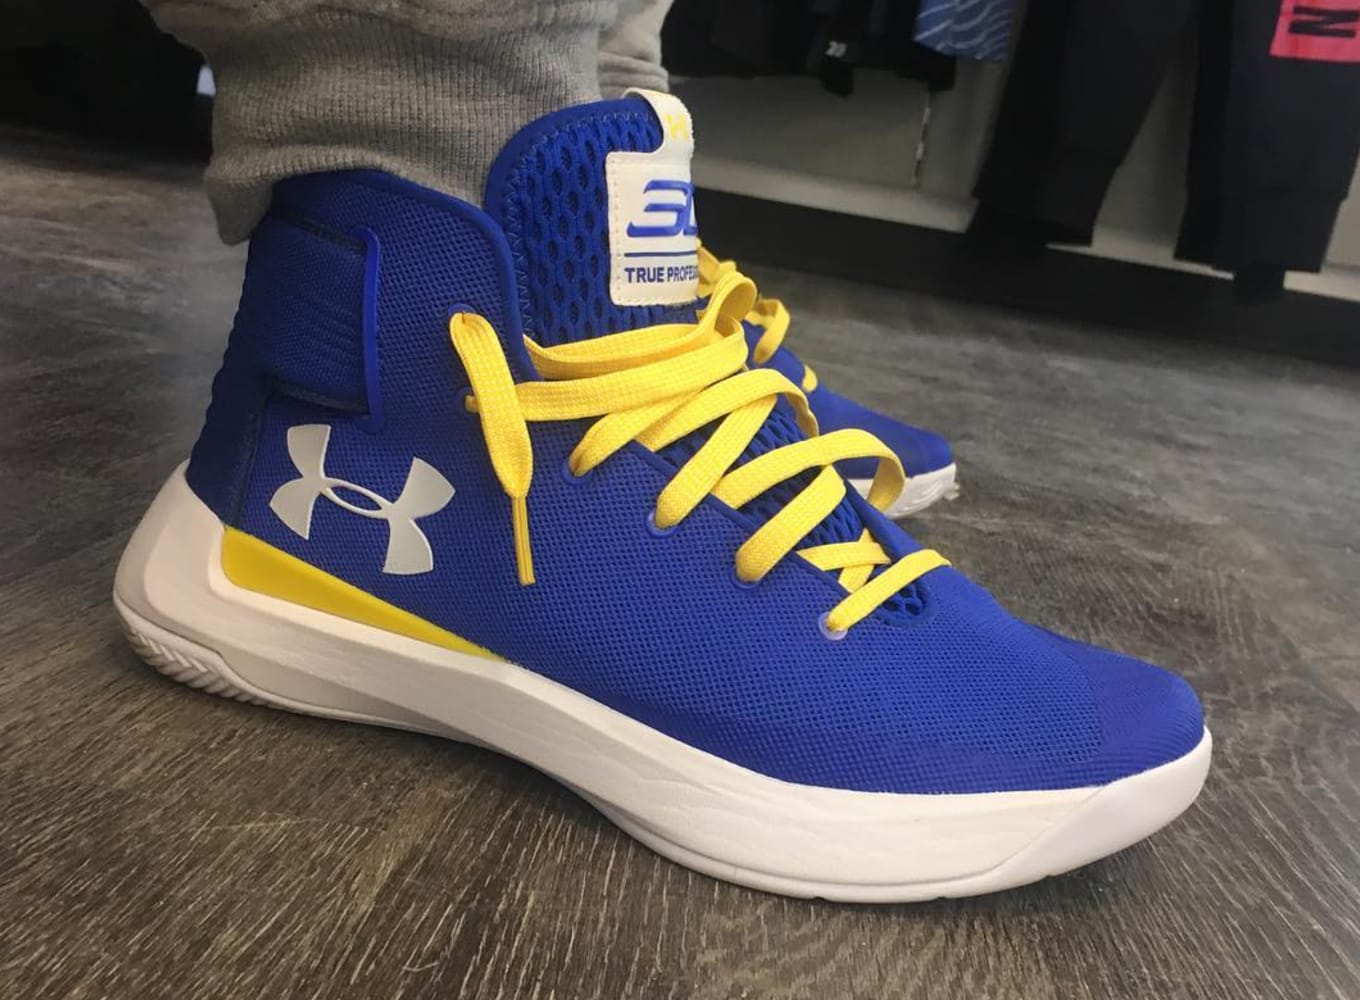 Under Armour Curry 3.5 | Sole Collector